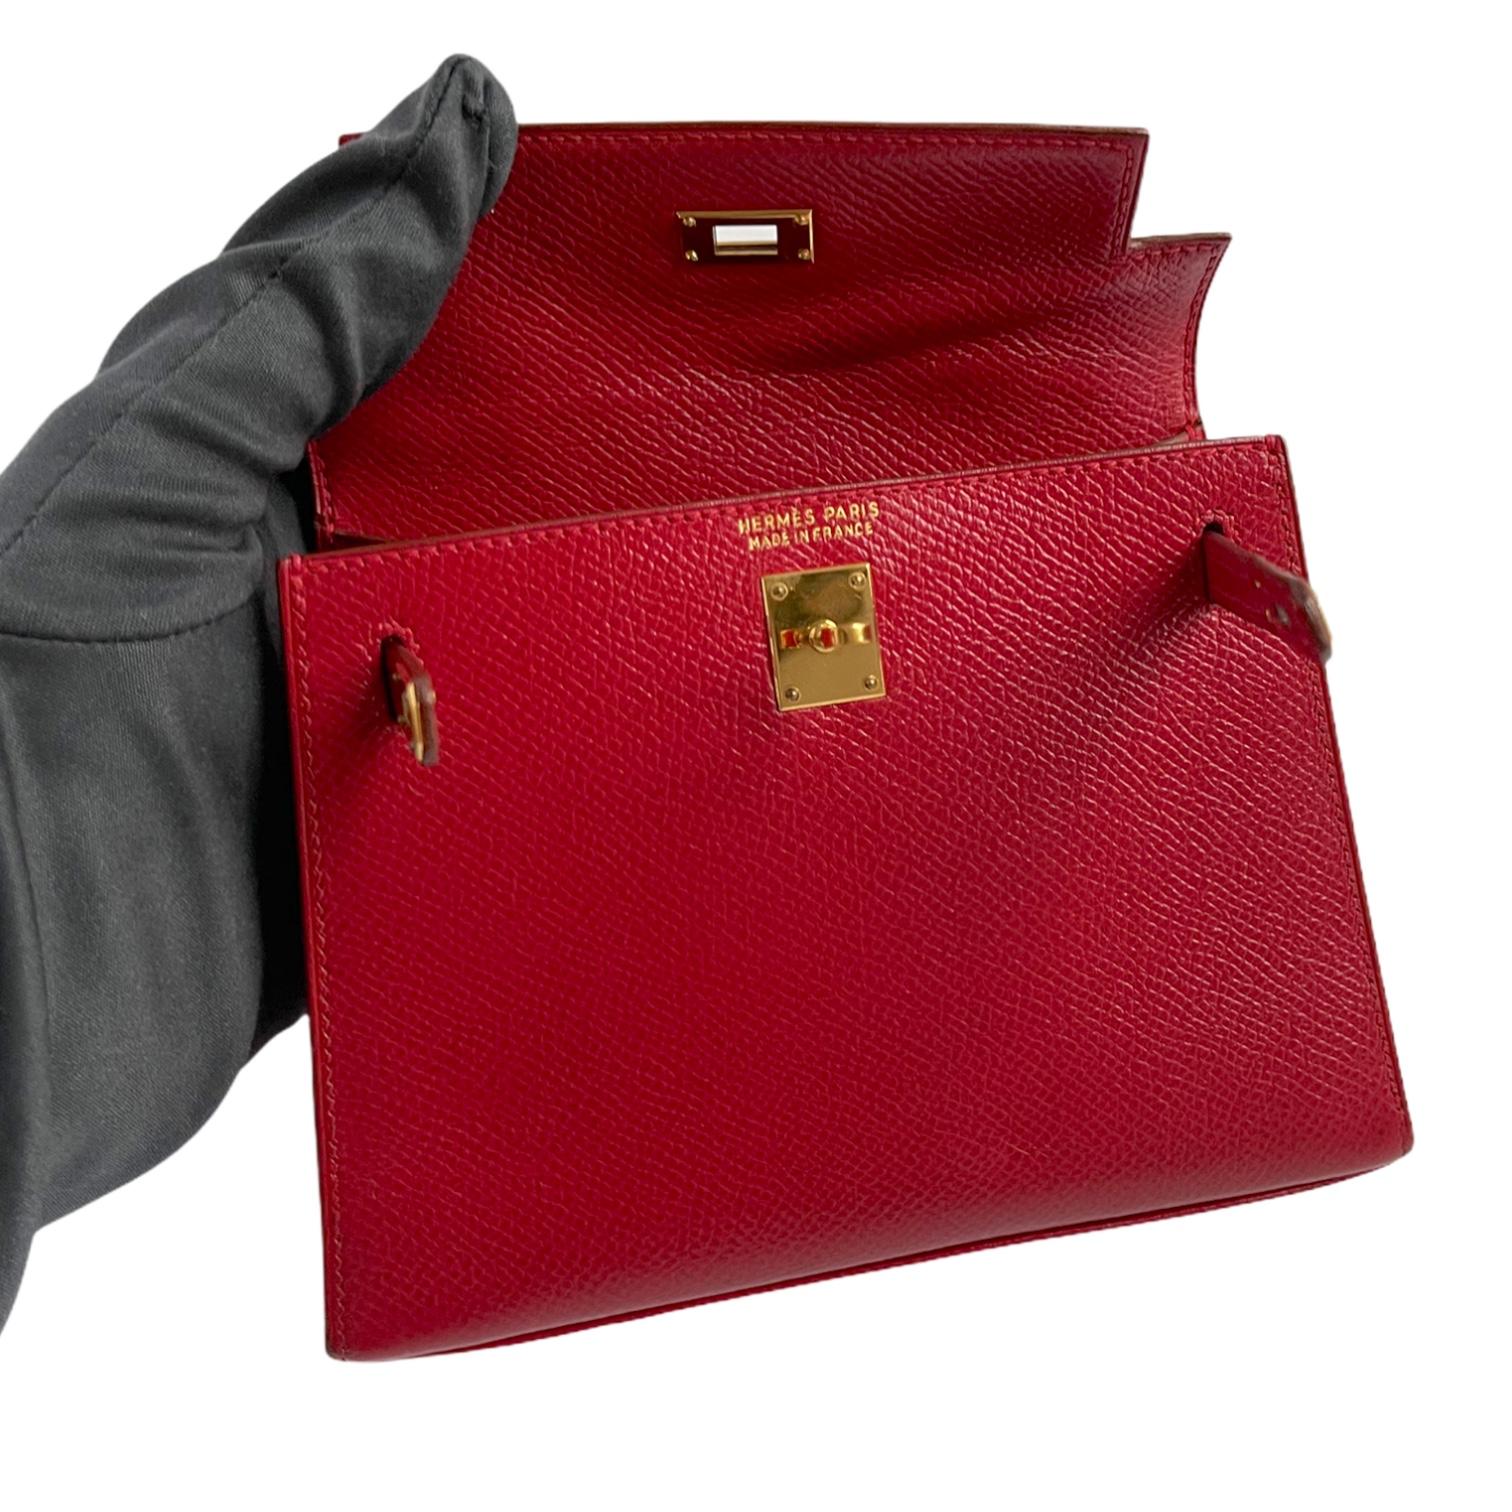 1stdibs Exclusives from Three Over Six

Brand: Hermès 
Style: Kelly Sellier
Size: Micro 15cm
Color: Rouge
Leather: Courchevel 
Hardware: Gold
Stamp: N 1993

Vintage excellent: This item is vintage and shows natural signs of ageing. This item will